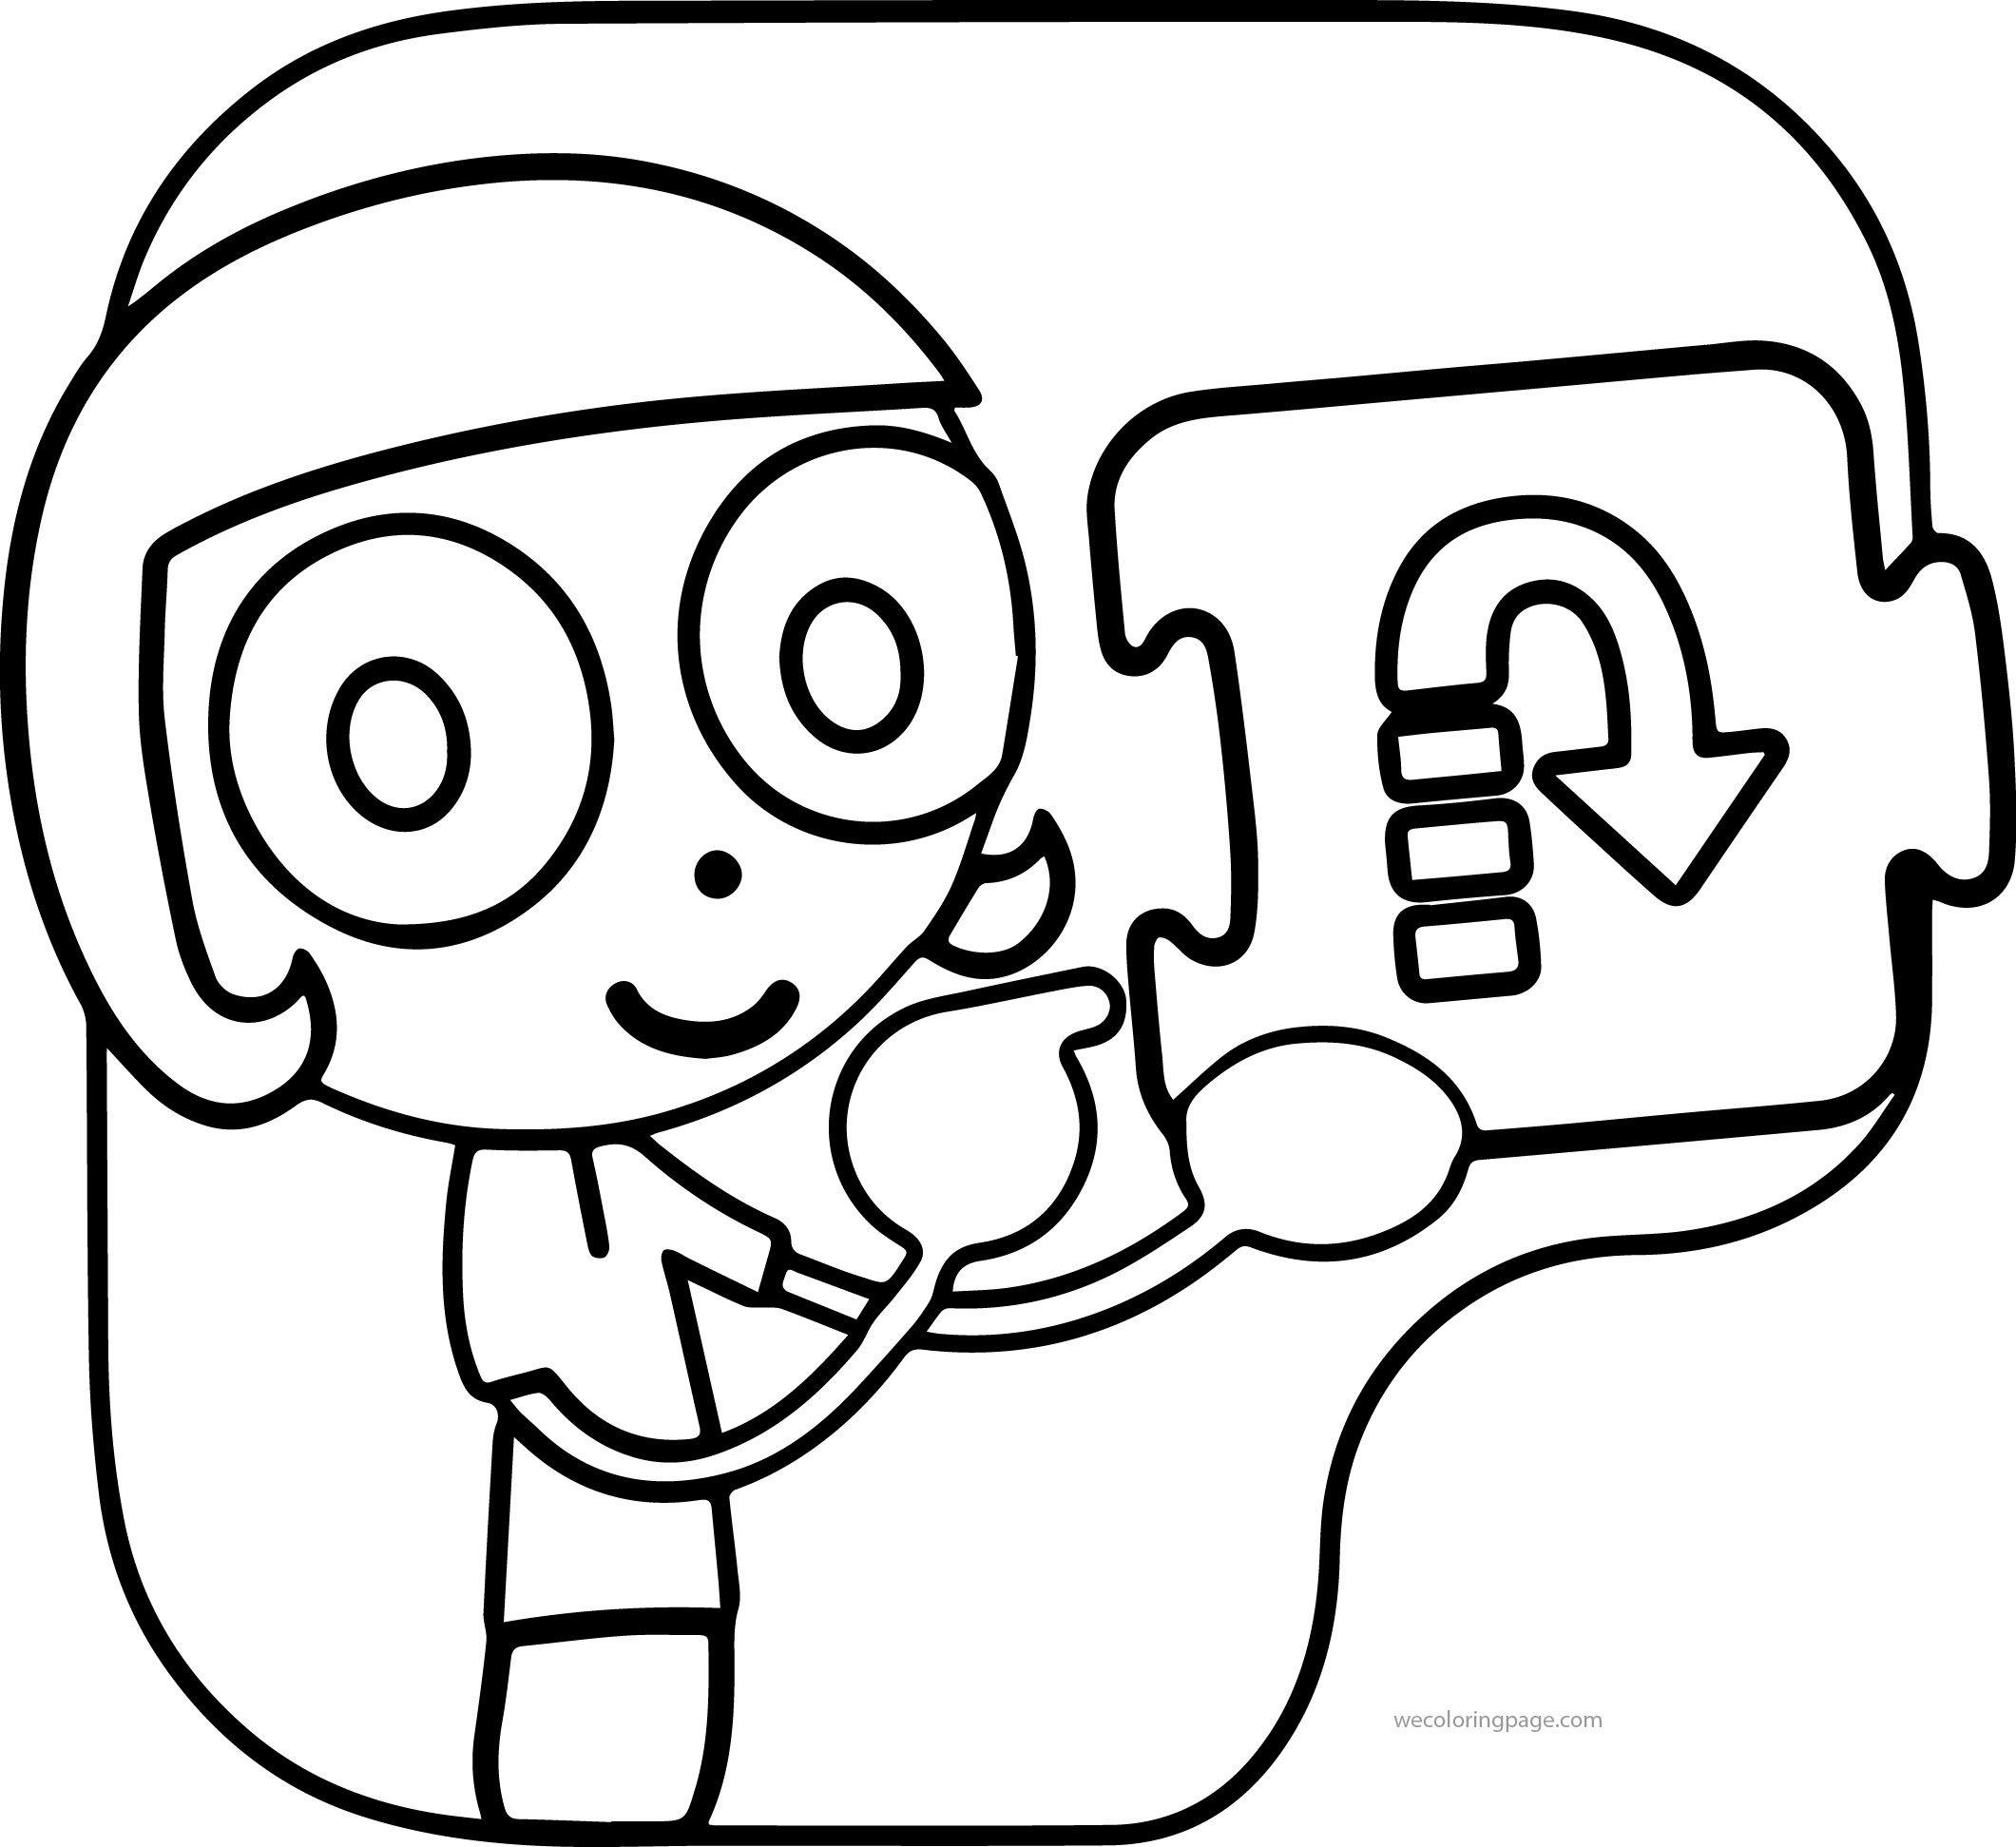 Pbs Kids Coloring Sheets
 Pbs Kids Coloring Pages Az Sketch Coloring Page